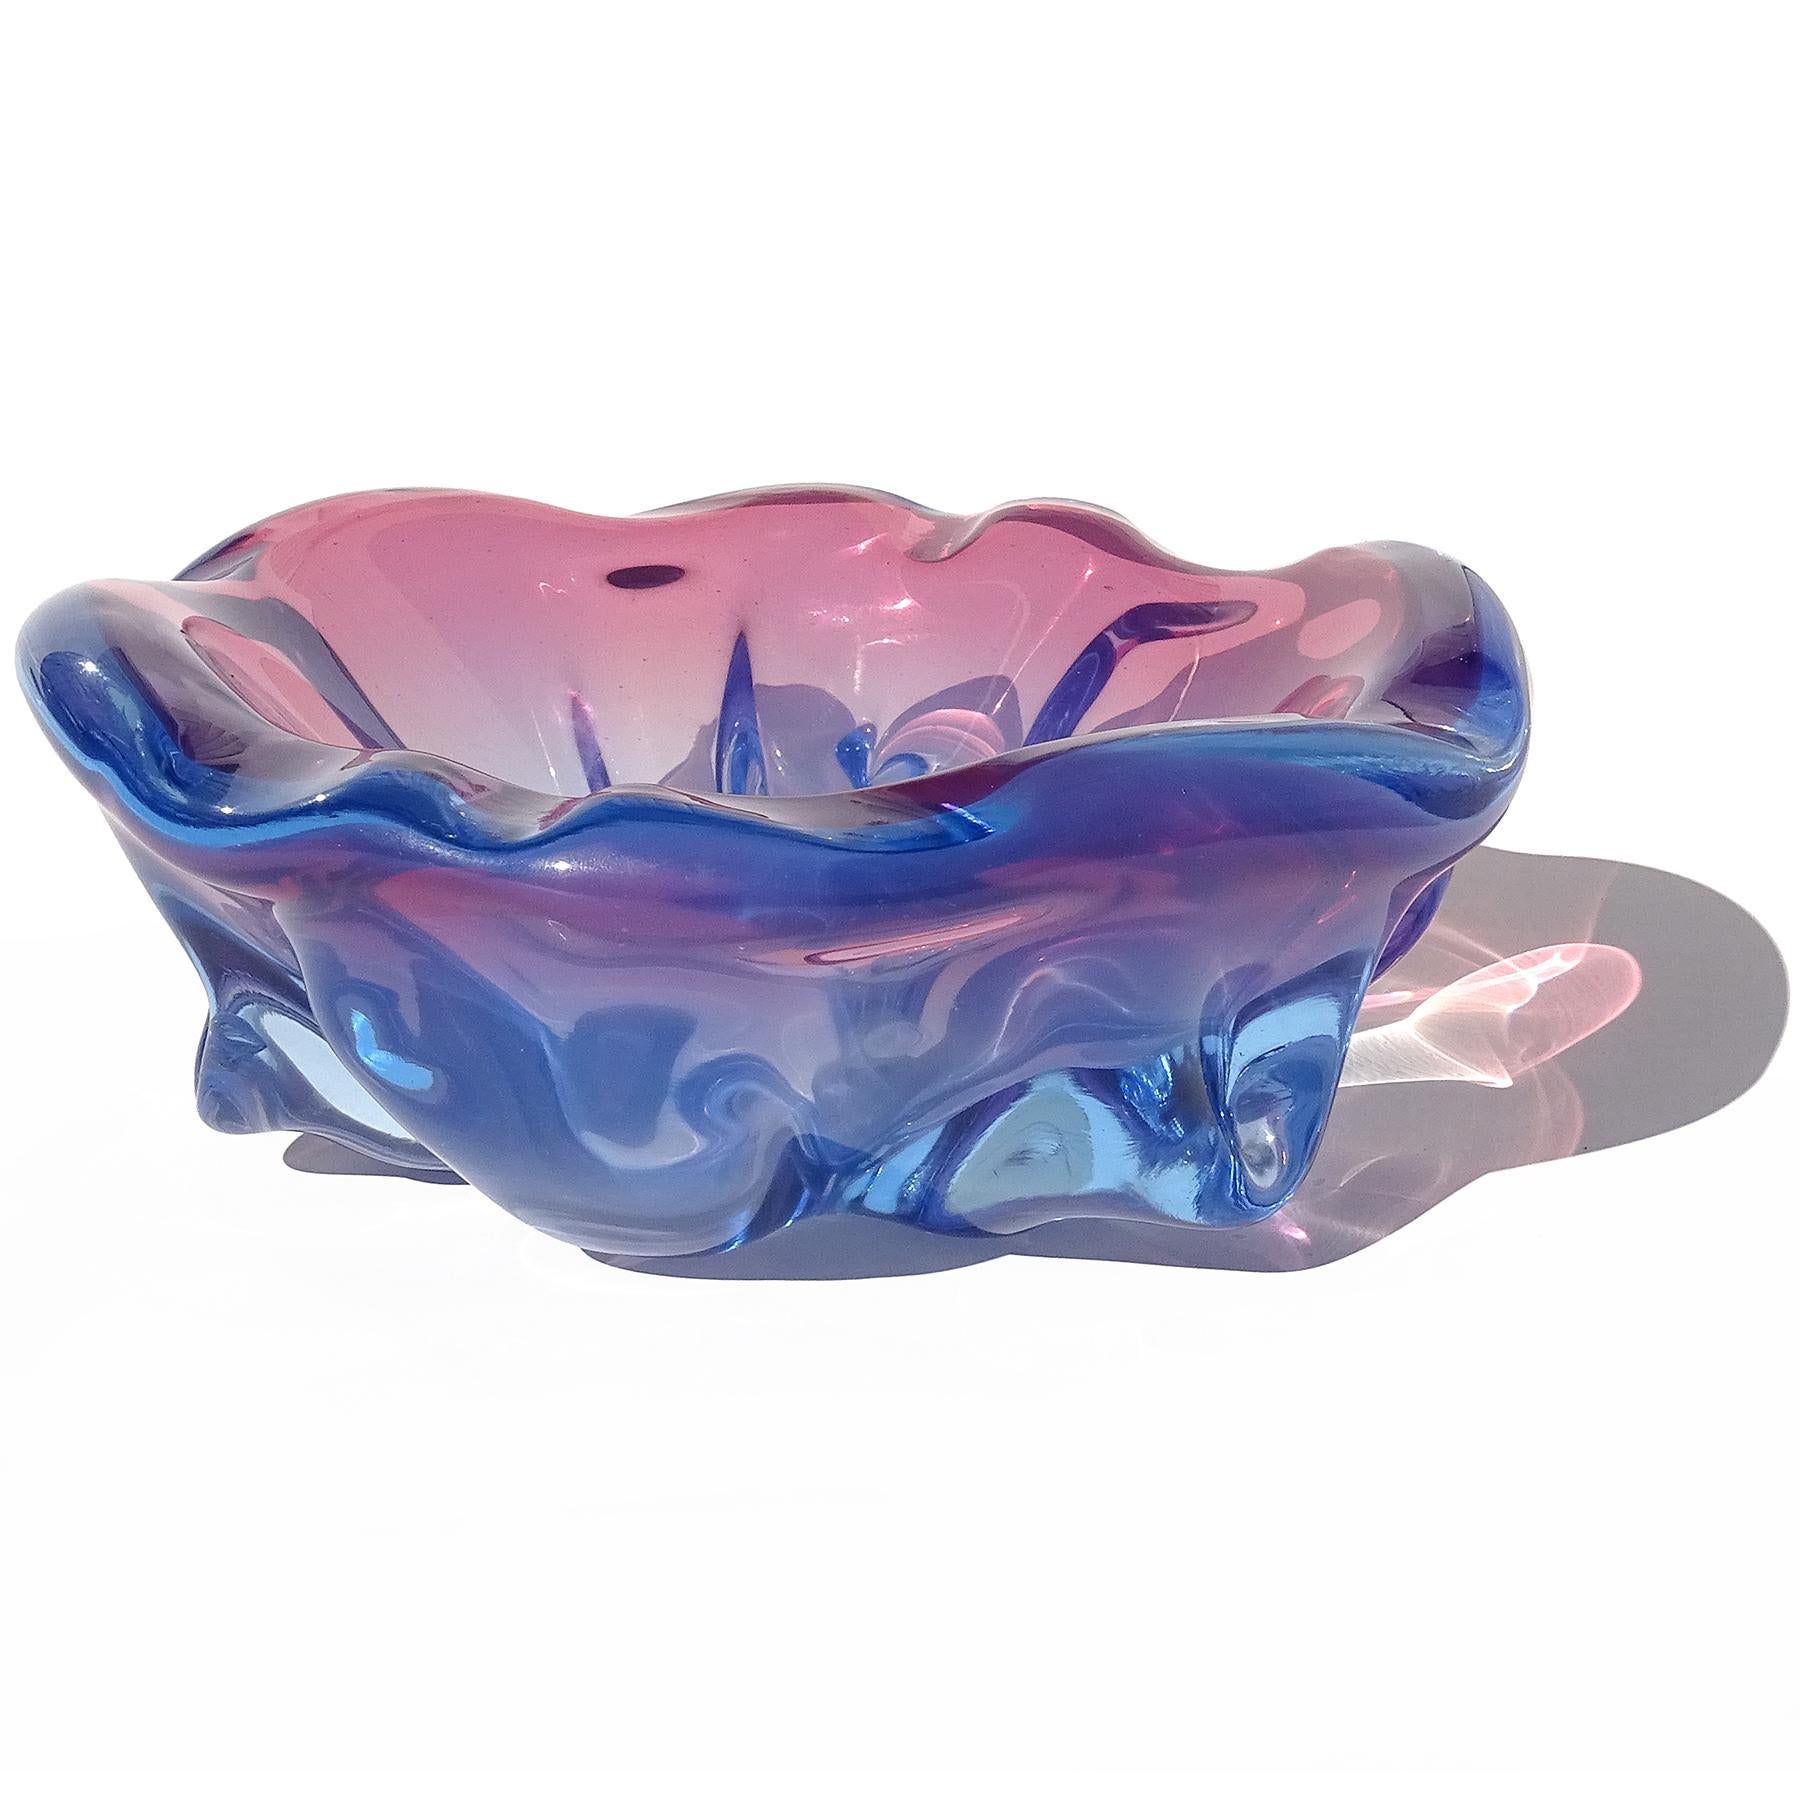 Beautiful vintage Murano hand blown Sommerso amethyst purple, pink, blue Italian art glass sculptural decorative bowl. Documented to designer Alfredo Barbini, circa 1950s-1960. The bowl has a ripple surface rim, with sculptural elements on the